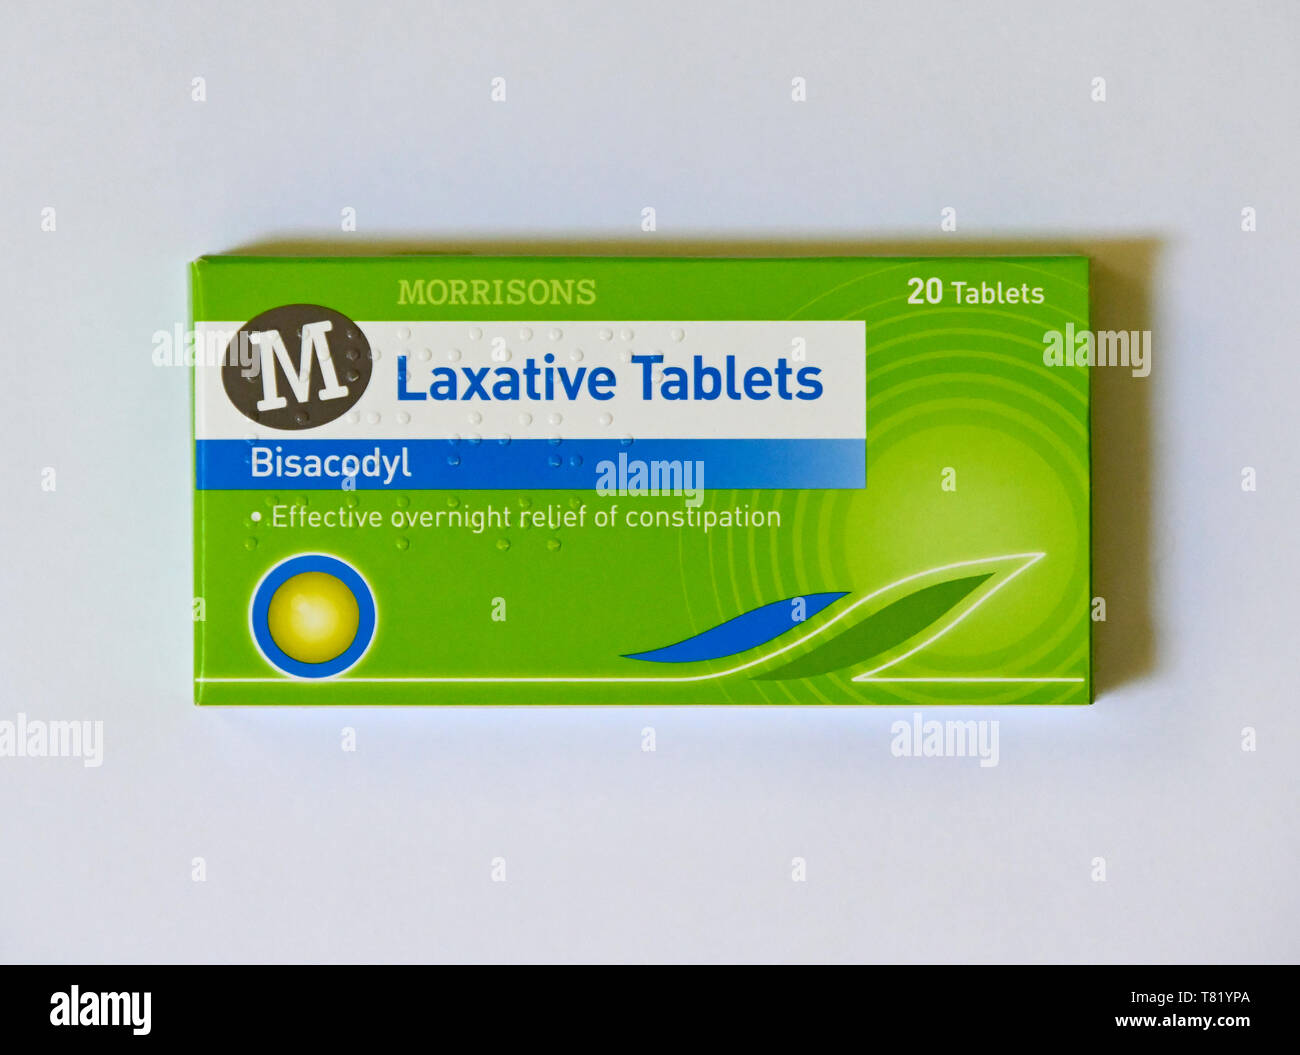 Pack of Morrison's Laxative Tablets. Bisacodyl. Effective overnight relief of constipation. 20 Tablets. Stock Photo